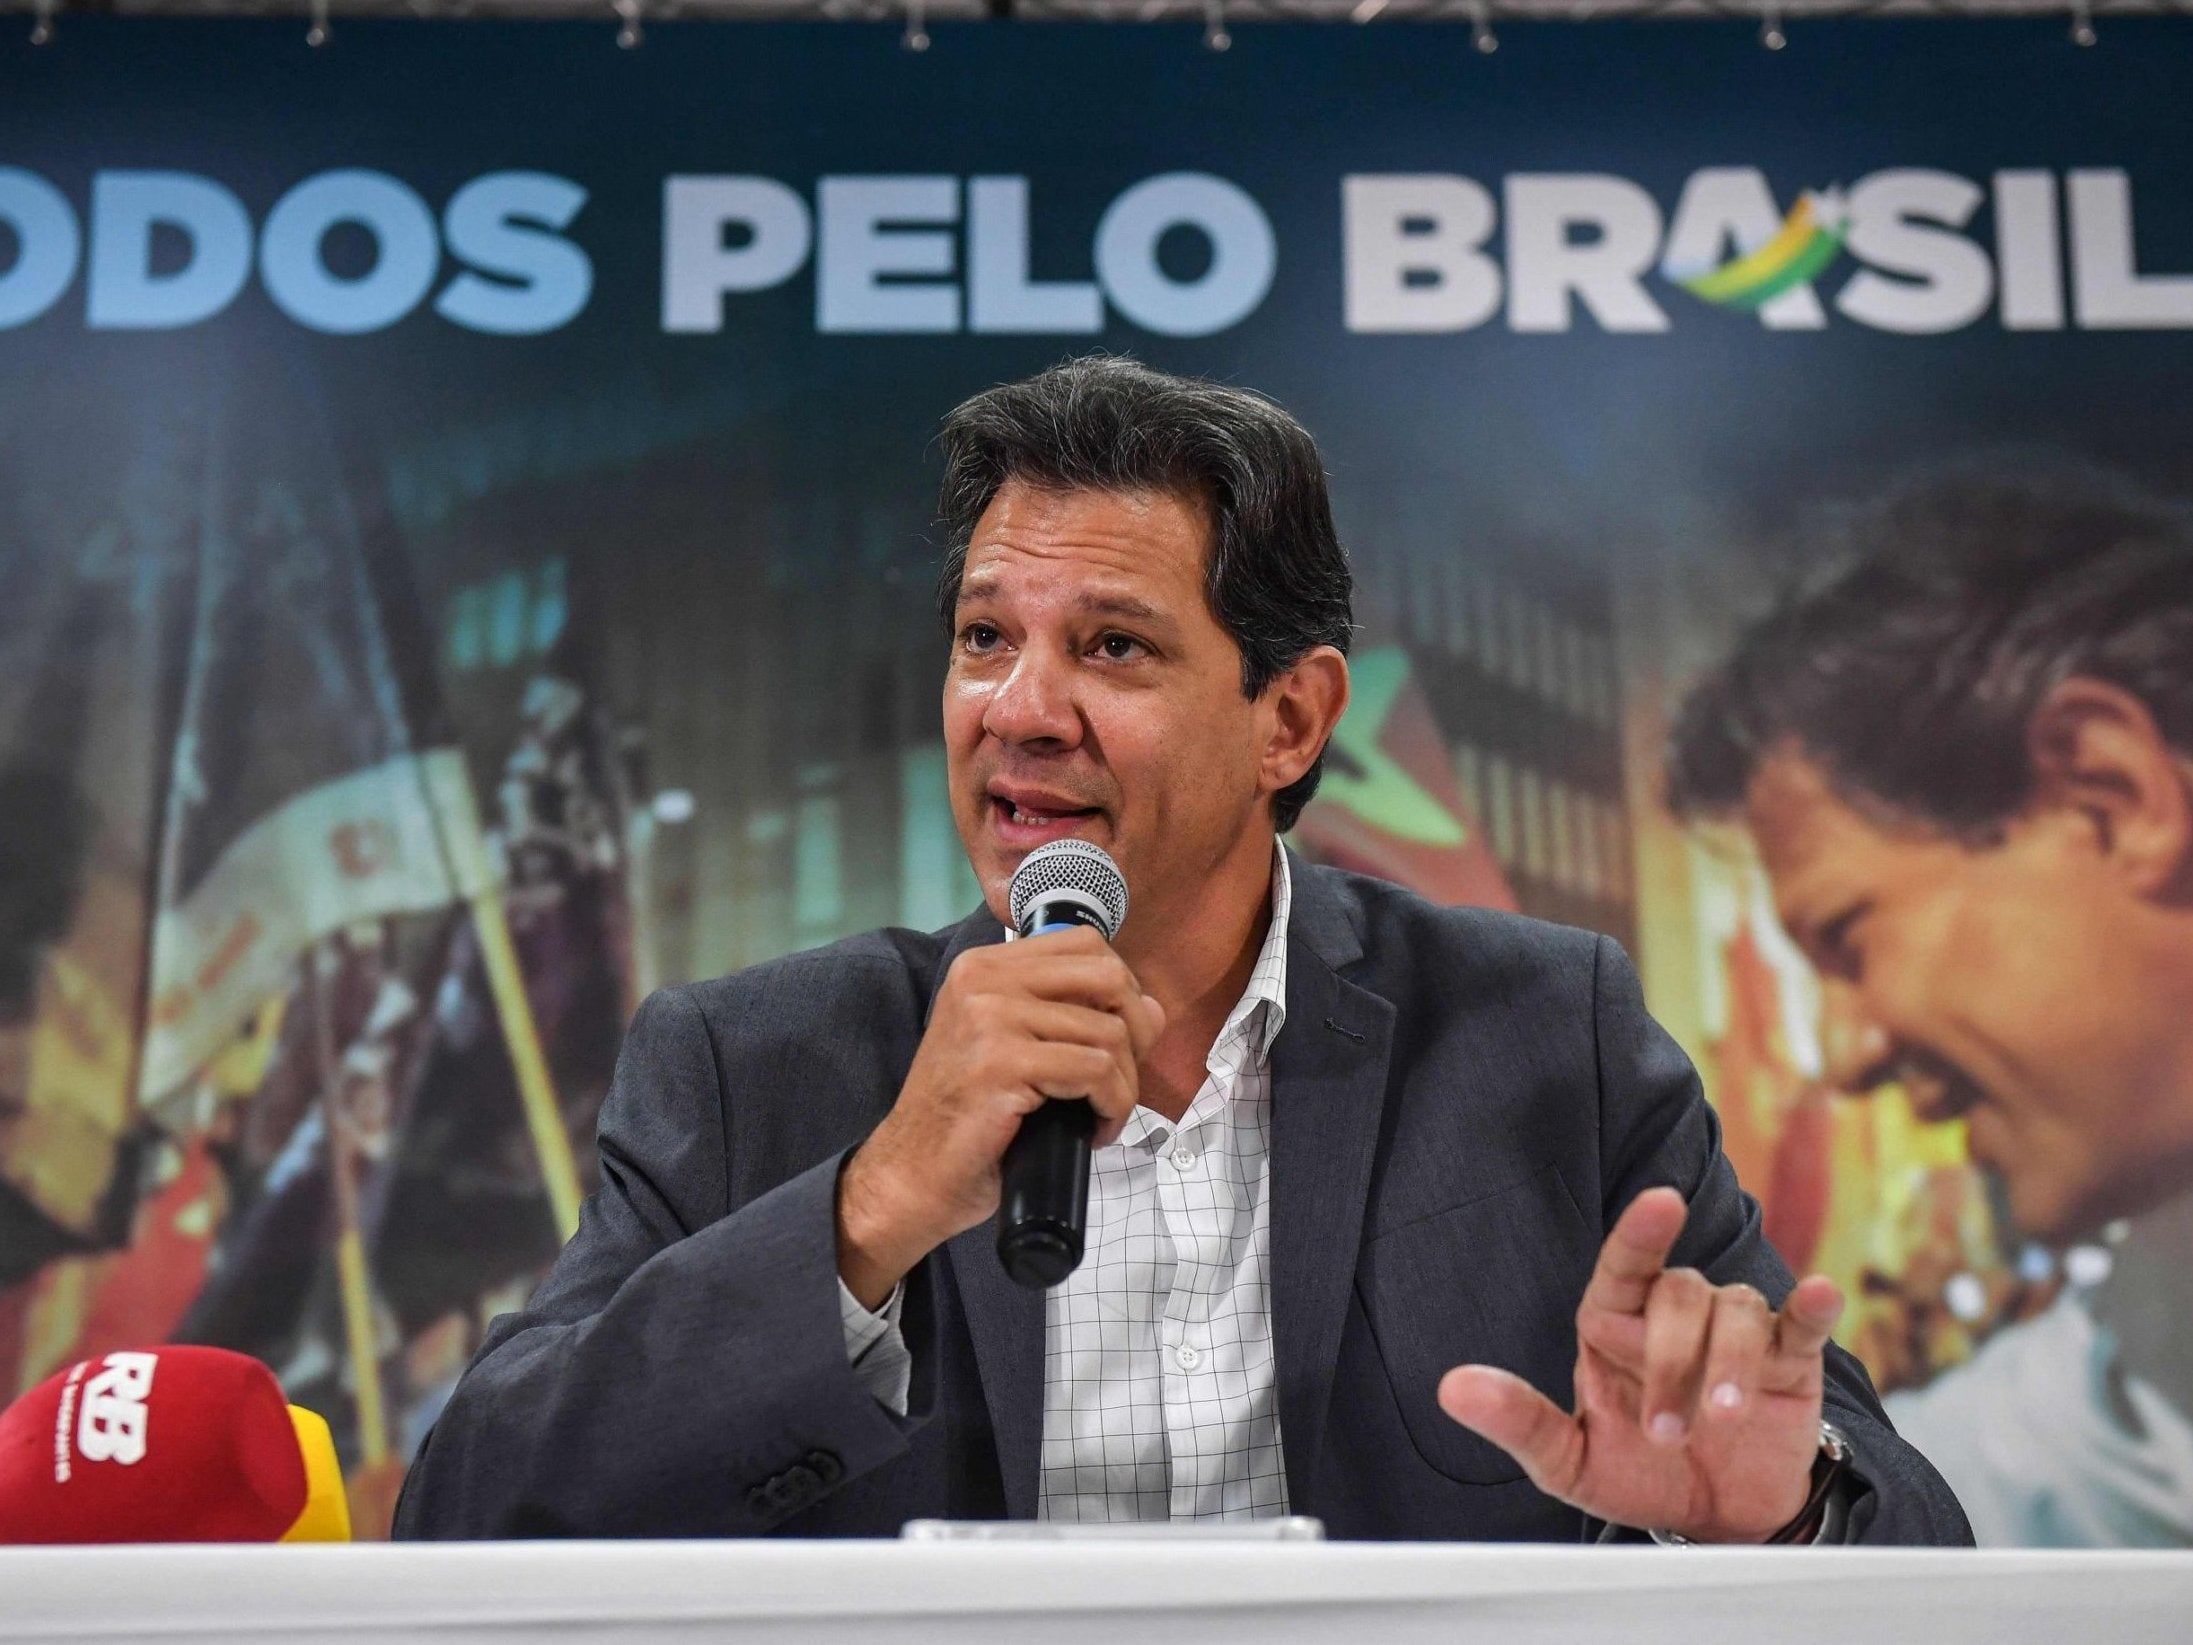 False voting information was sent to millions via Whatsapp before the election run-off between candidates Fernando Haddad of the Workers Party